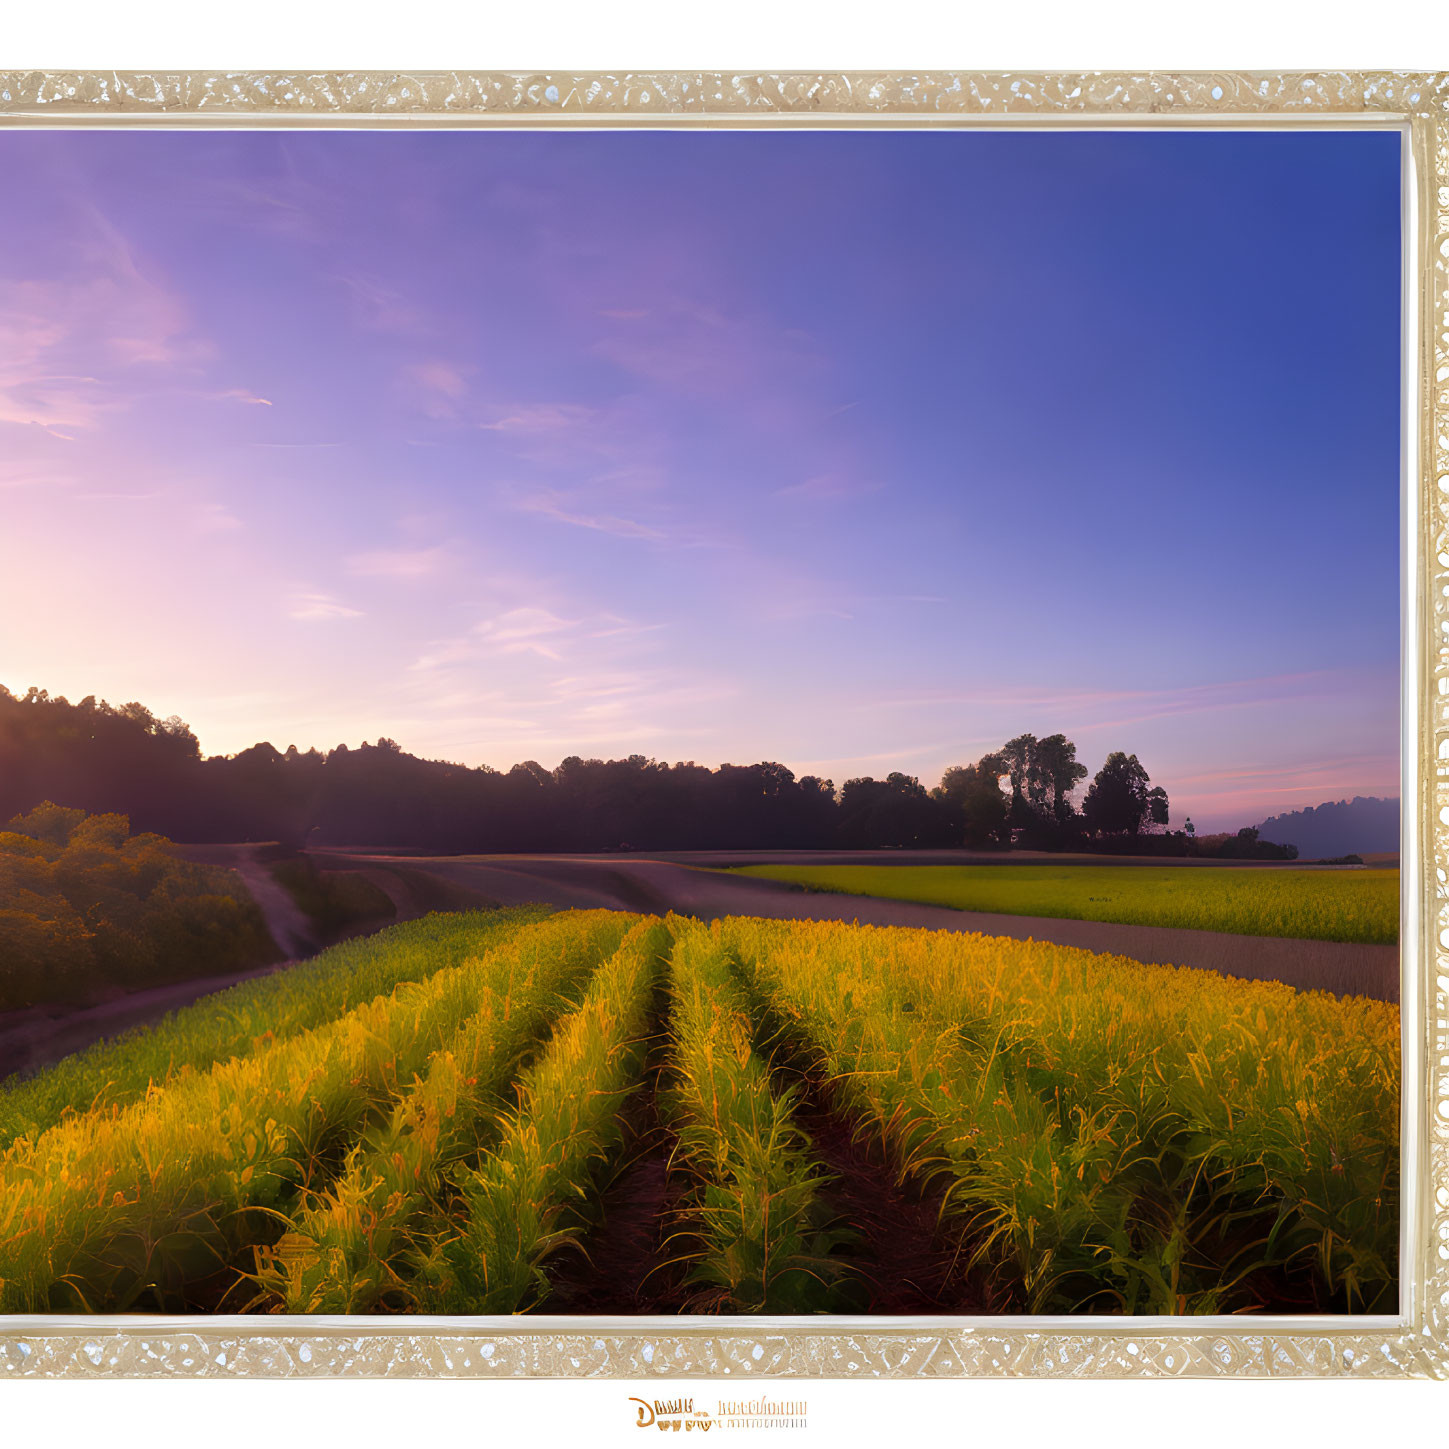 Scenic framed photo of lush field with crops, tree line, vibrant purple and orange sky